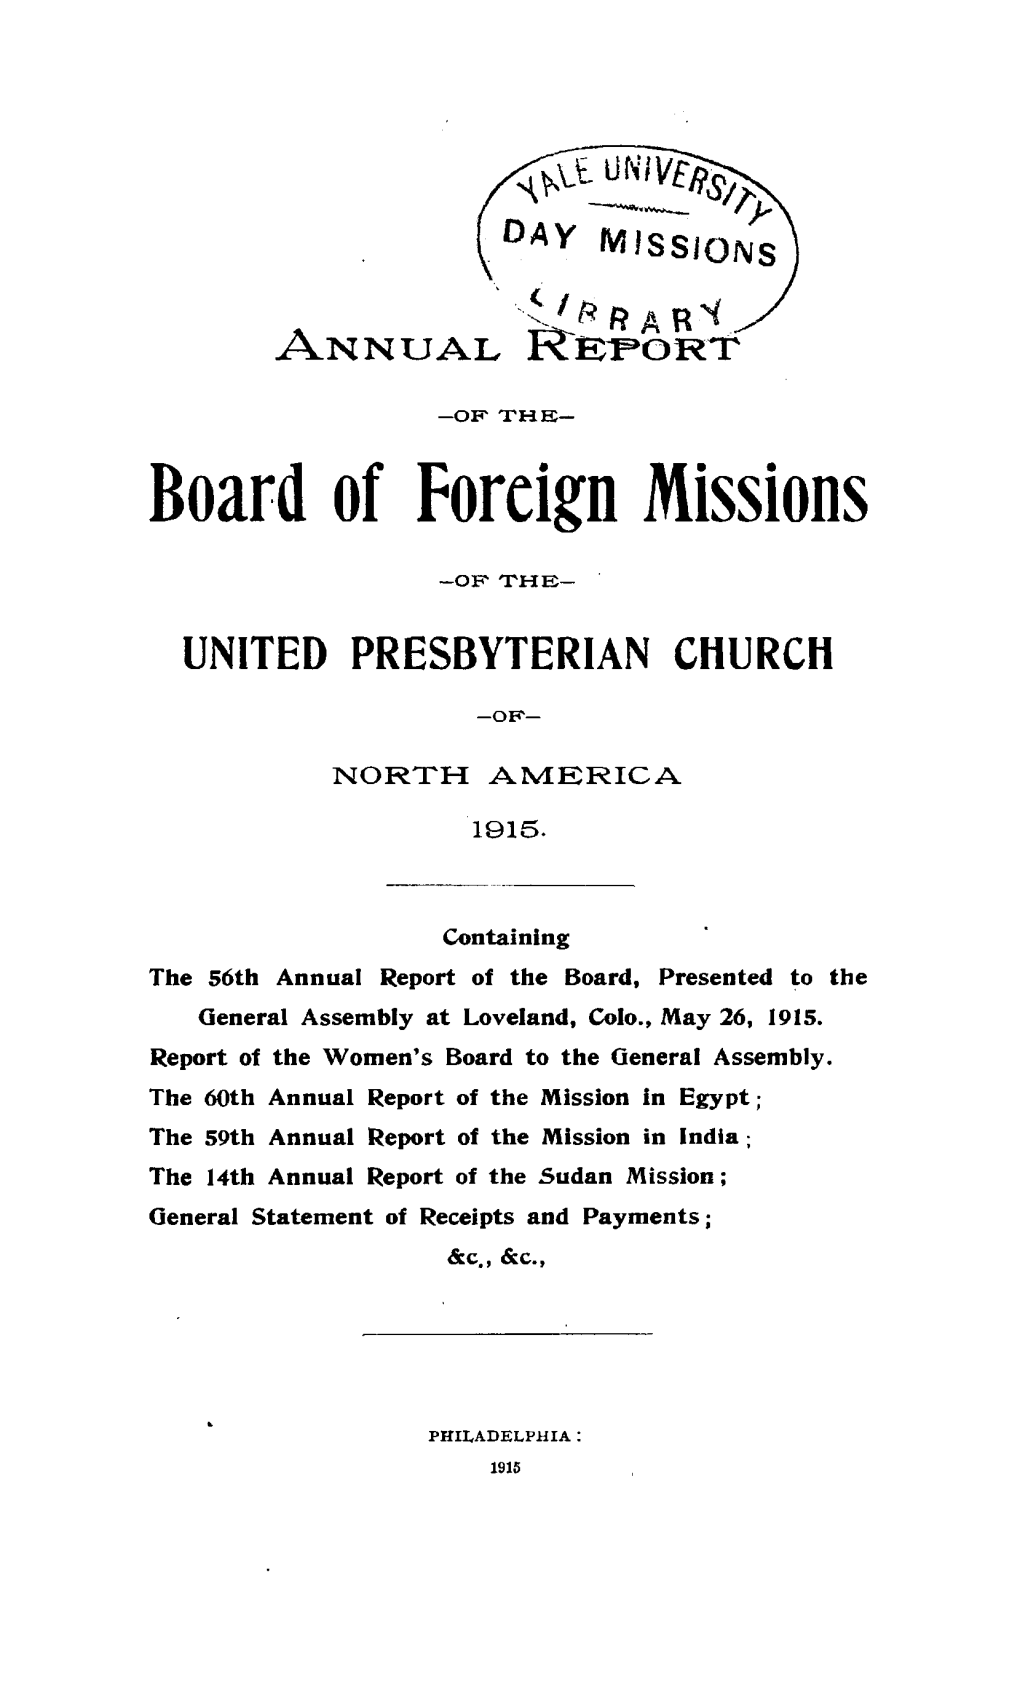 Board of Foreign Missions